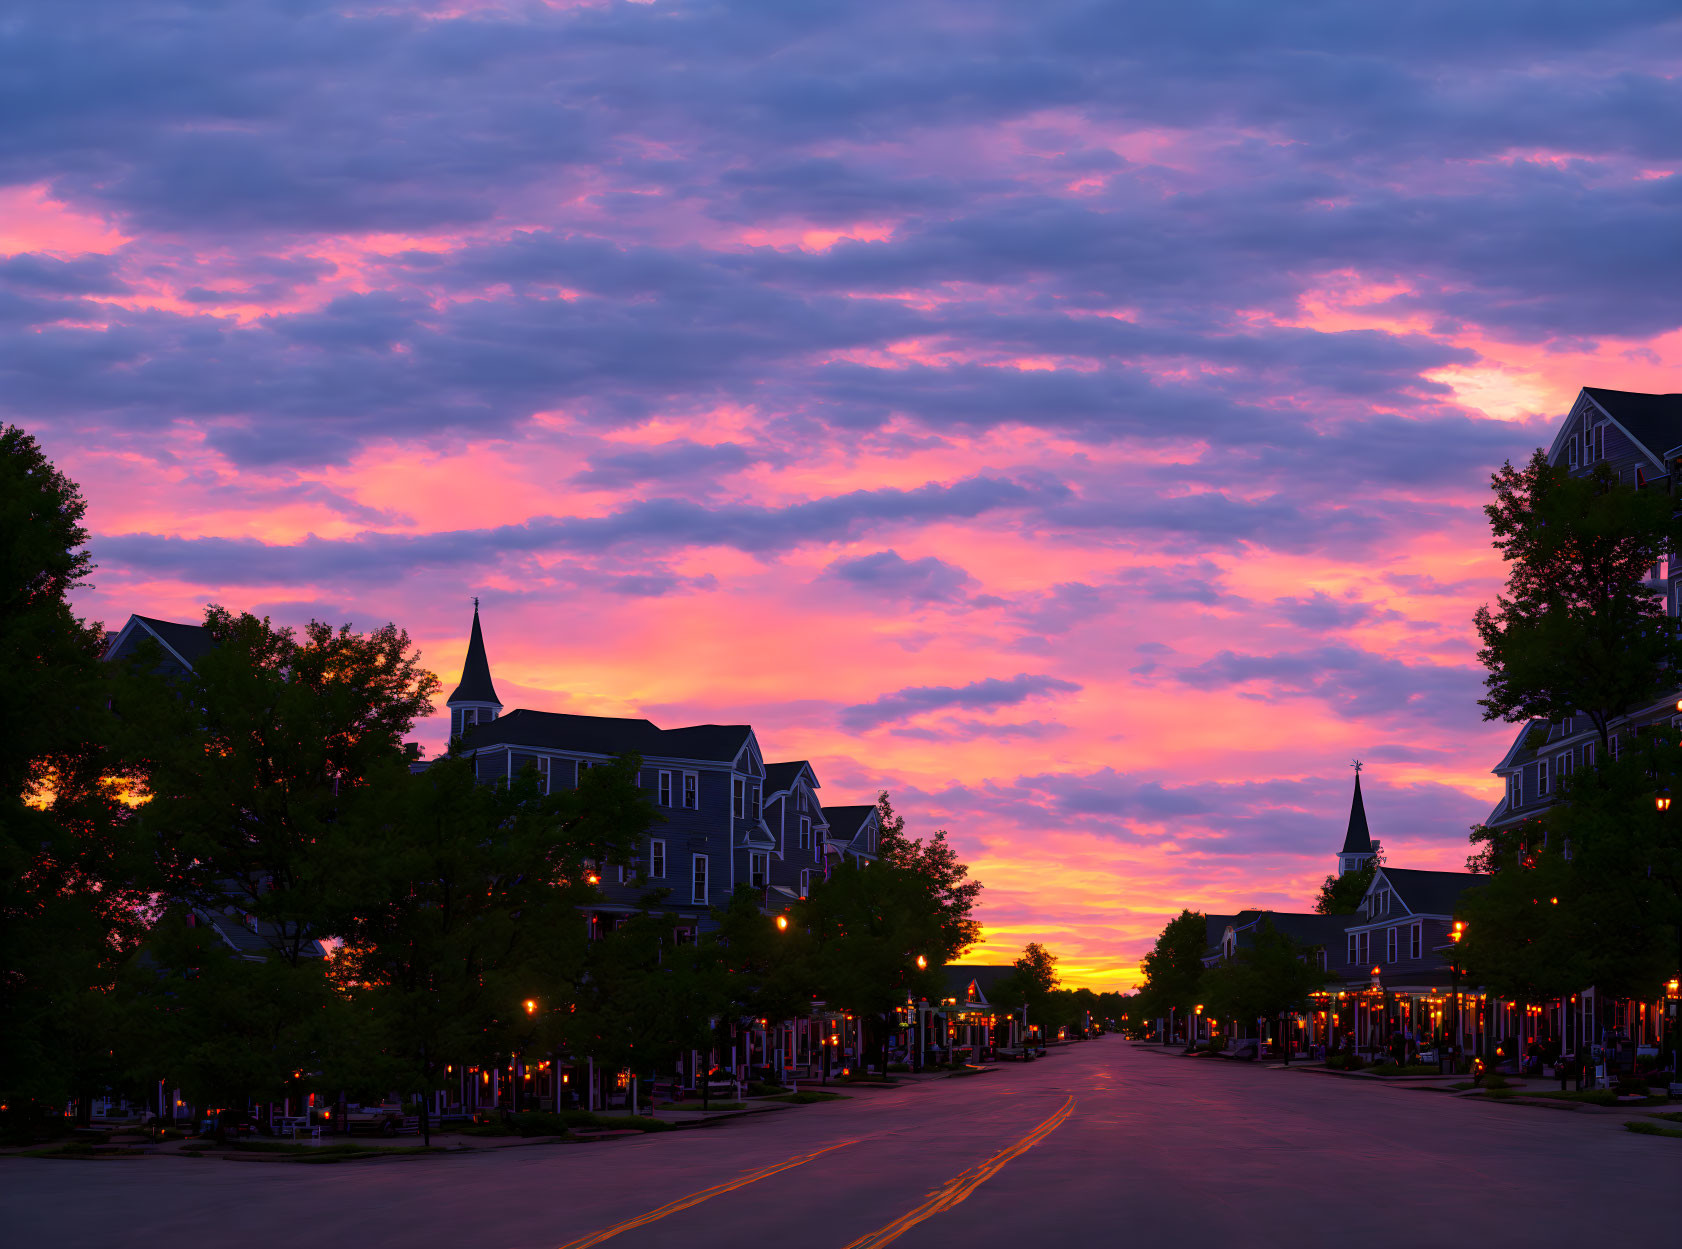 Colorful sunset over Victorian houses and streetlights with steeple in skyline